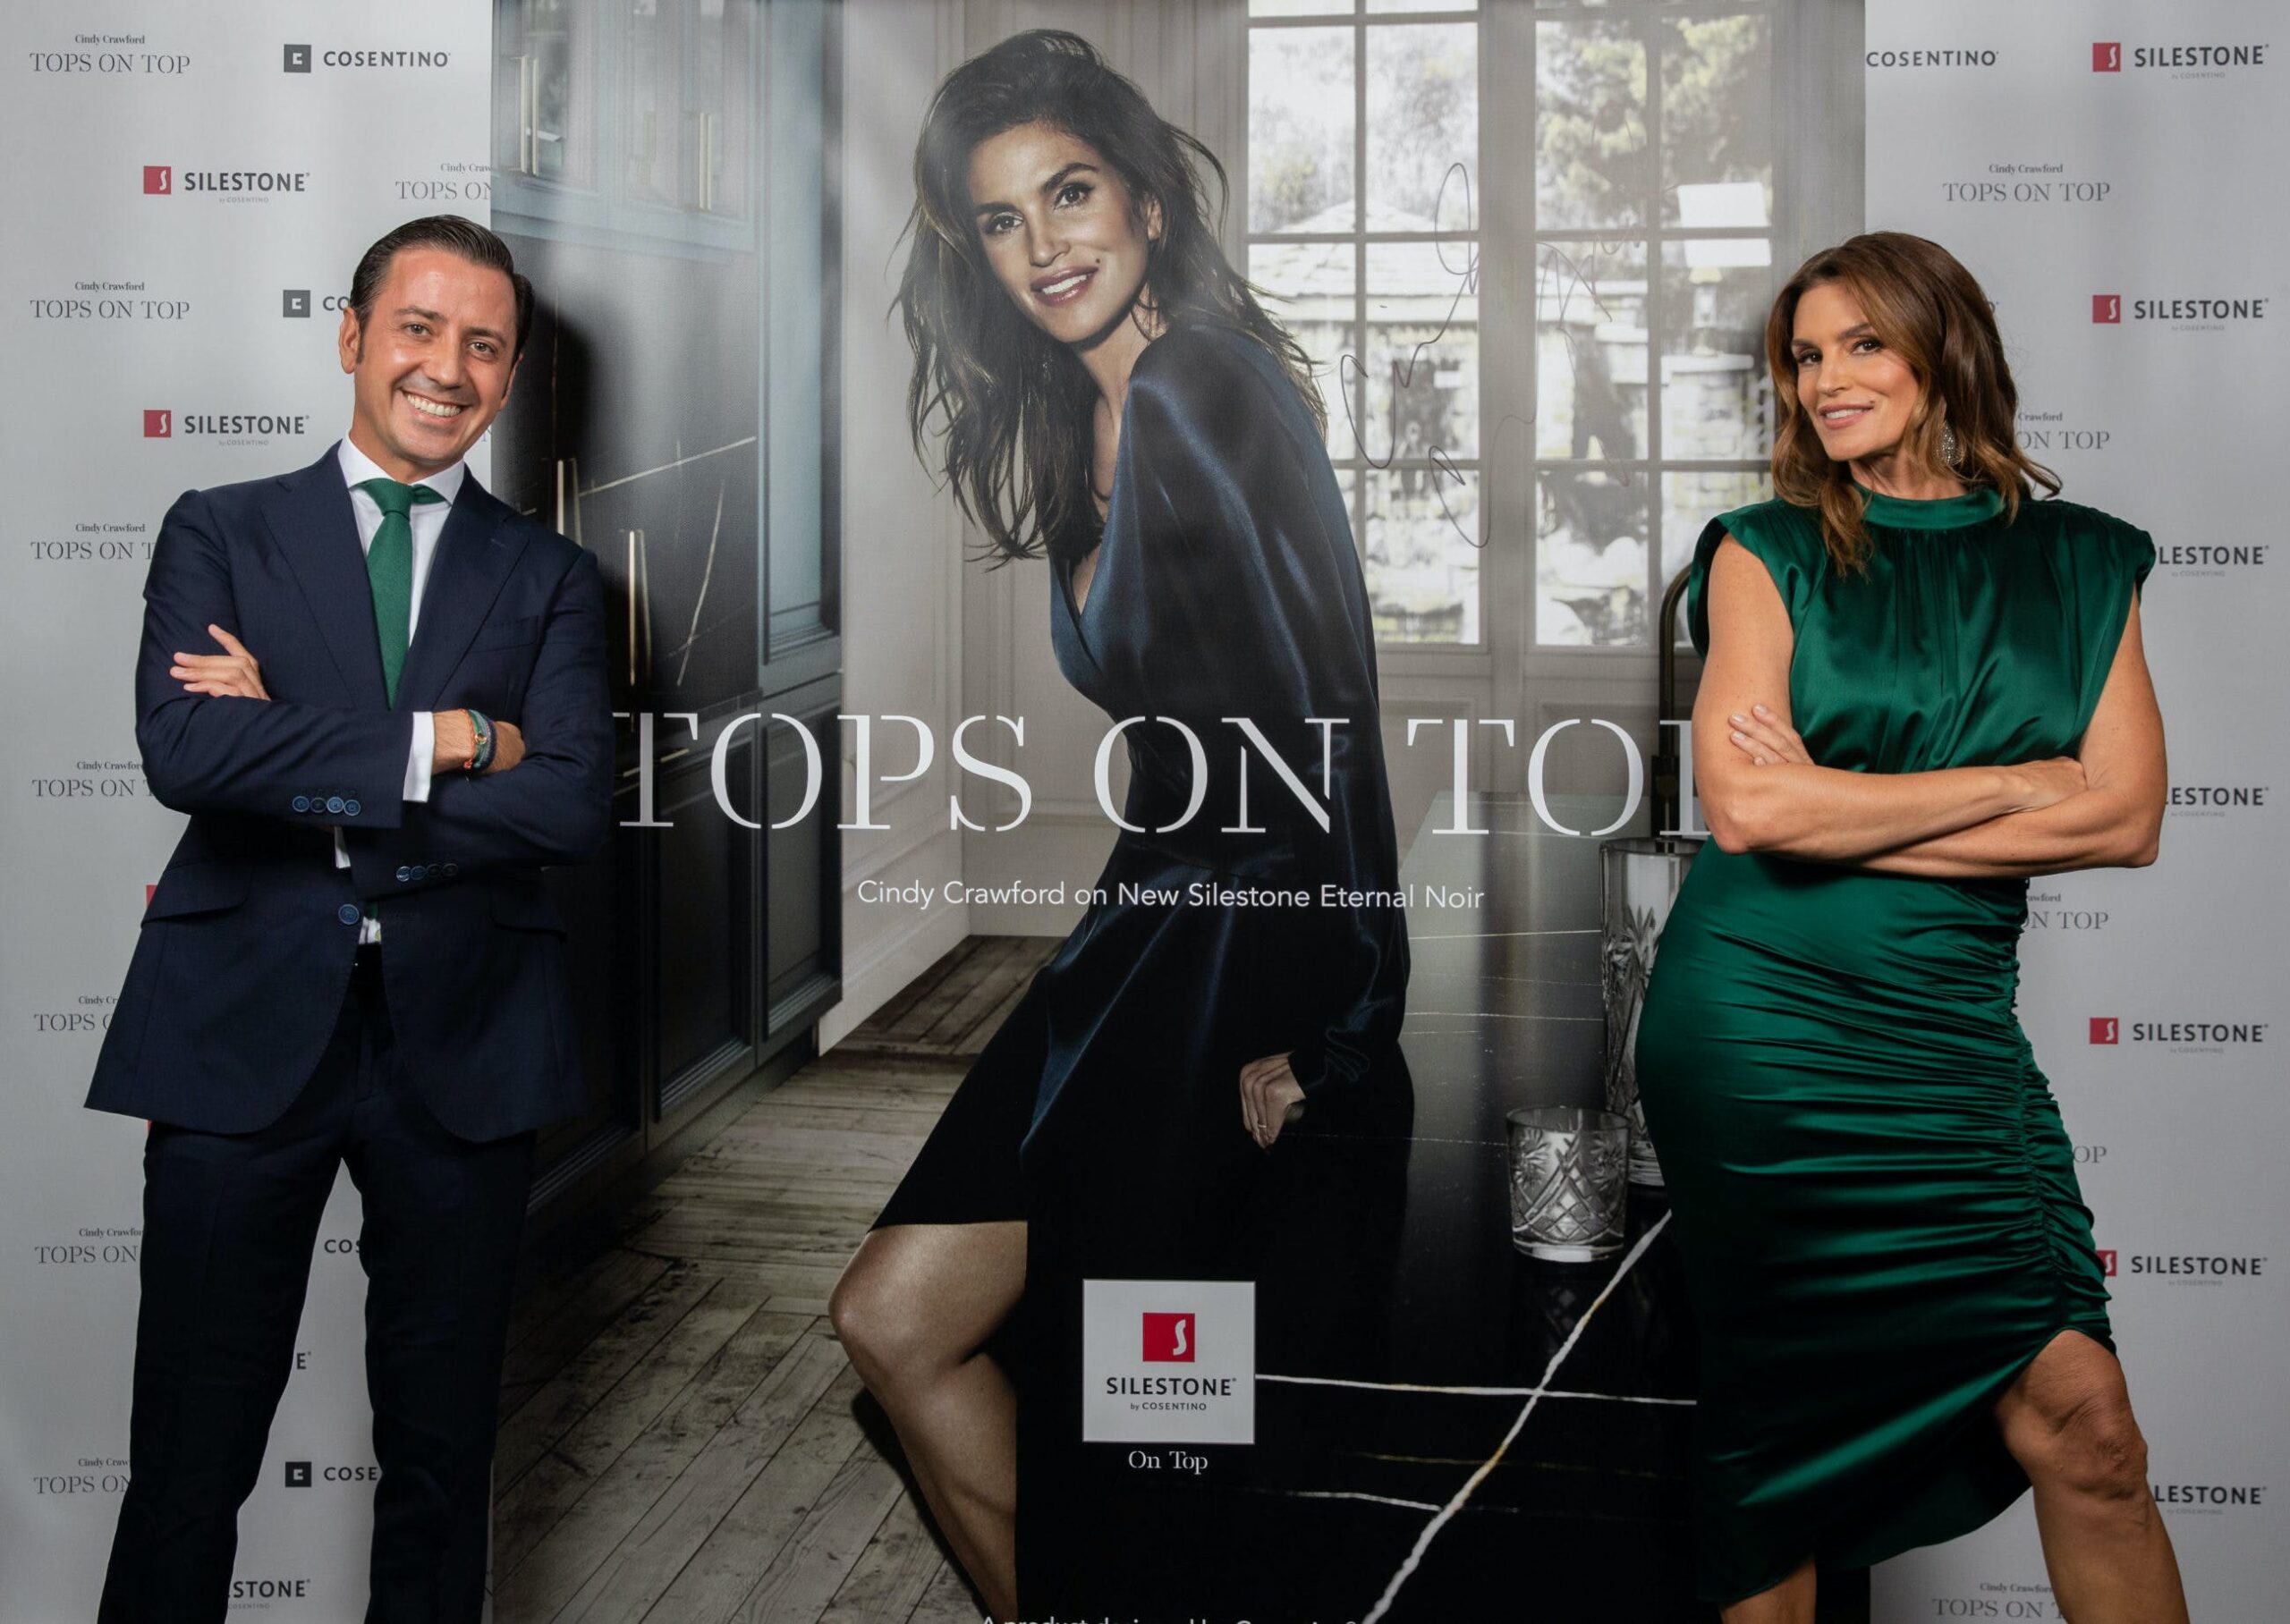 Image 33 of Eduardo Cosentino y Cindy Crawford Tops On Top 2019 Londres 3 scaled in Silestone® Presents its New "Tops on Top 2019" Campaign Featuring Cindy Crawford - Cosentino